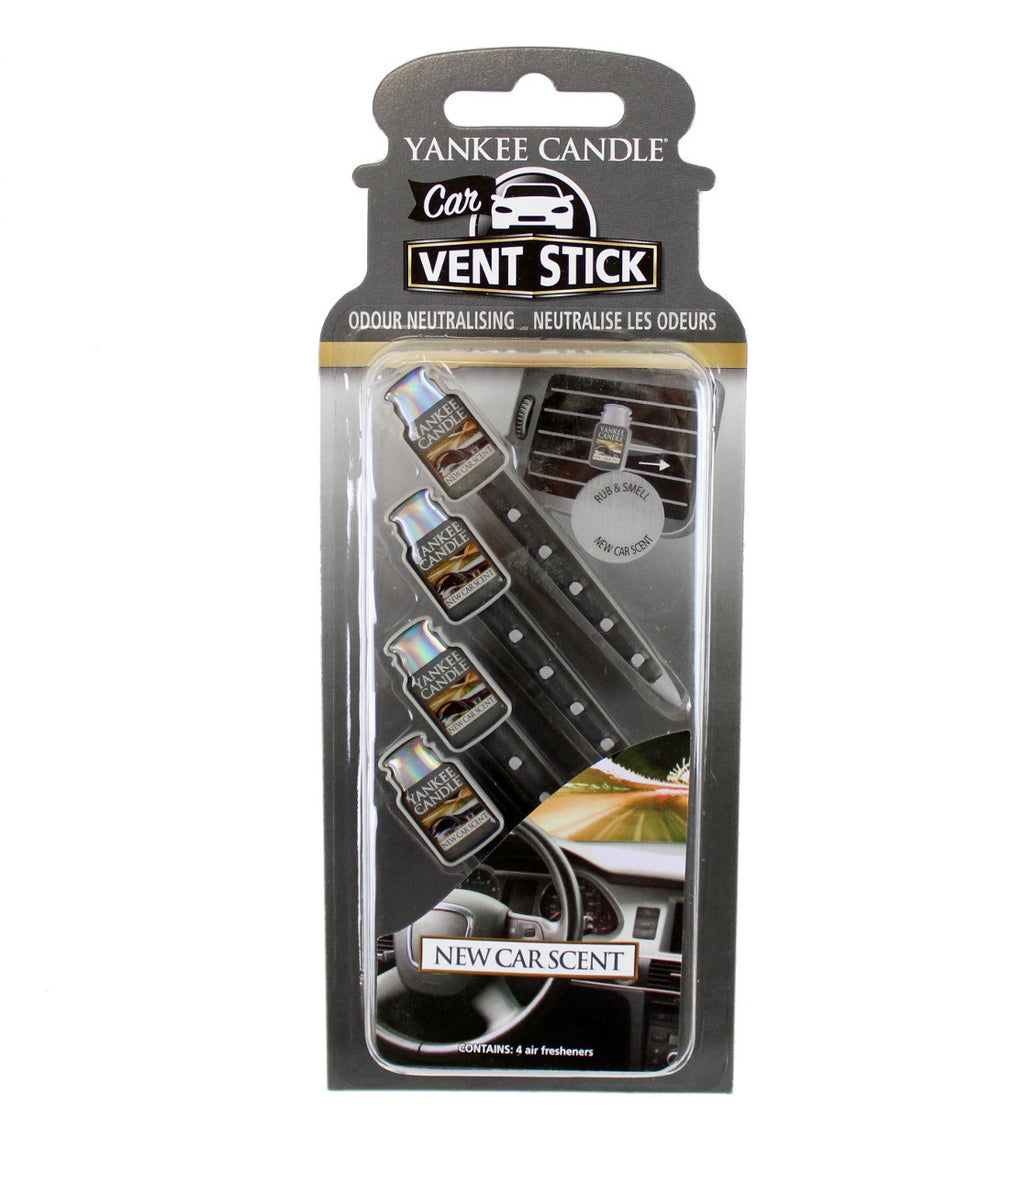 NEW CAR SCENT -Yankee Candle- Vent Stick